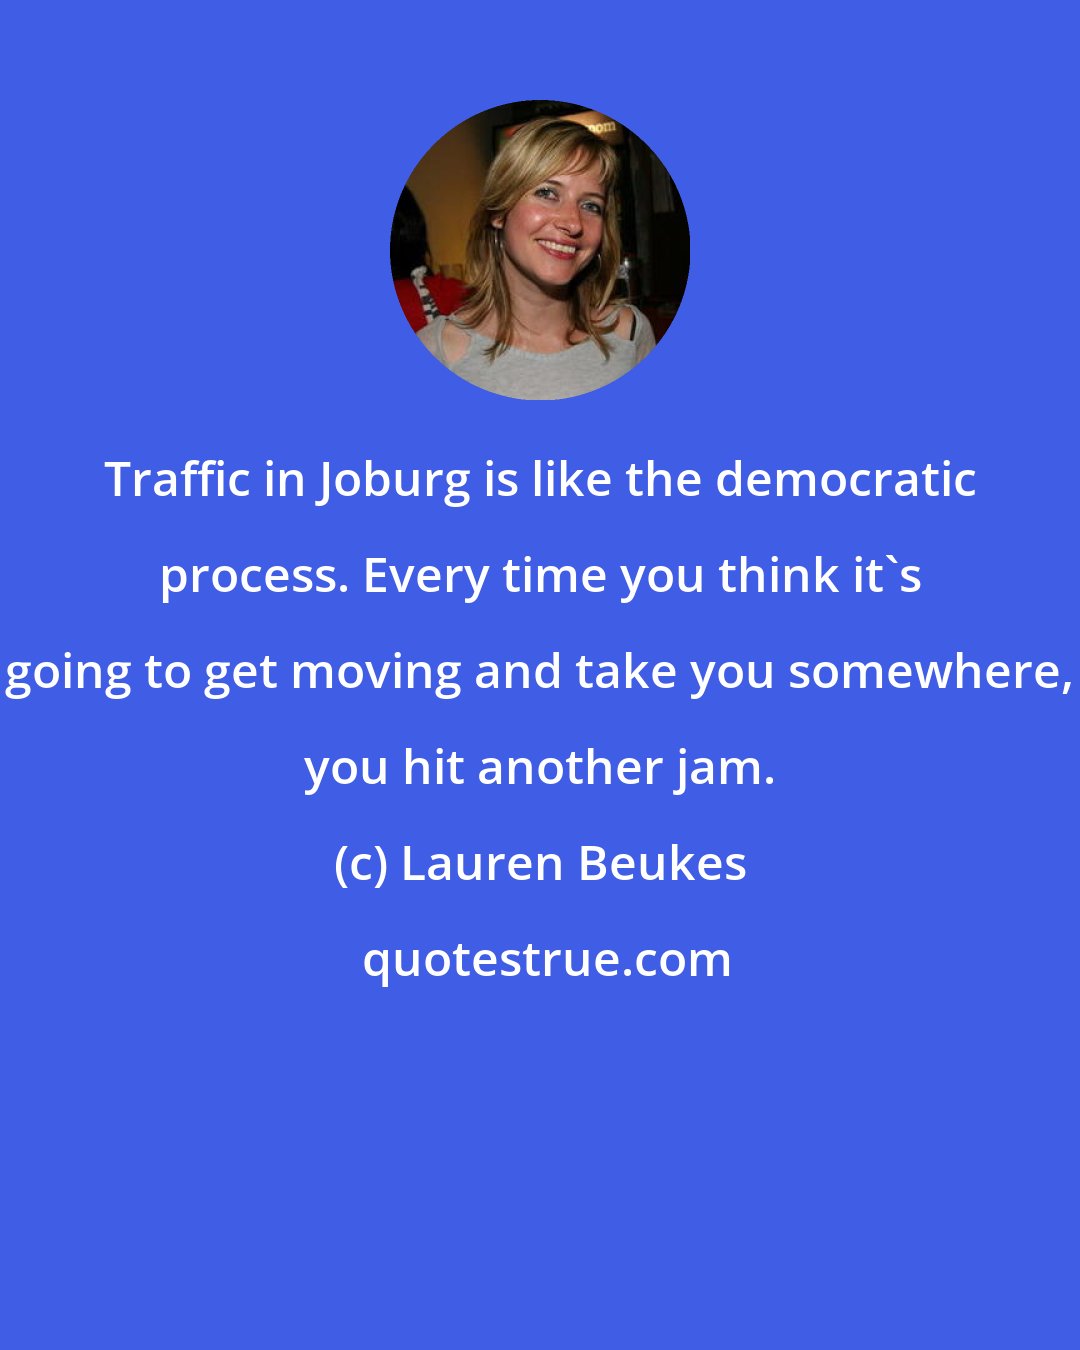 Lauren Beukes: Traffic in Joburg is like the democratic process. Every time you think it's going to get moving and take you somewhere, you hit another jam.